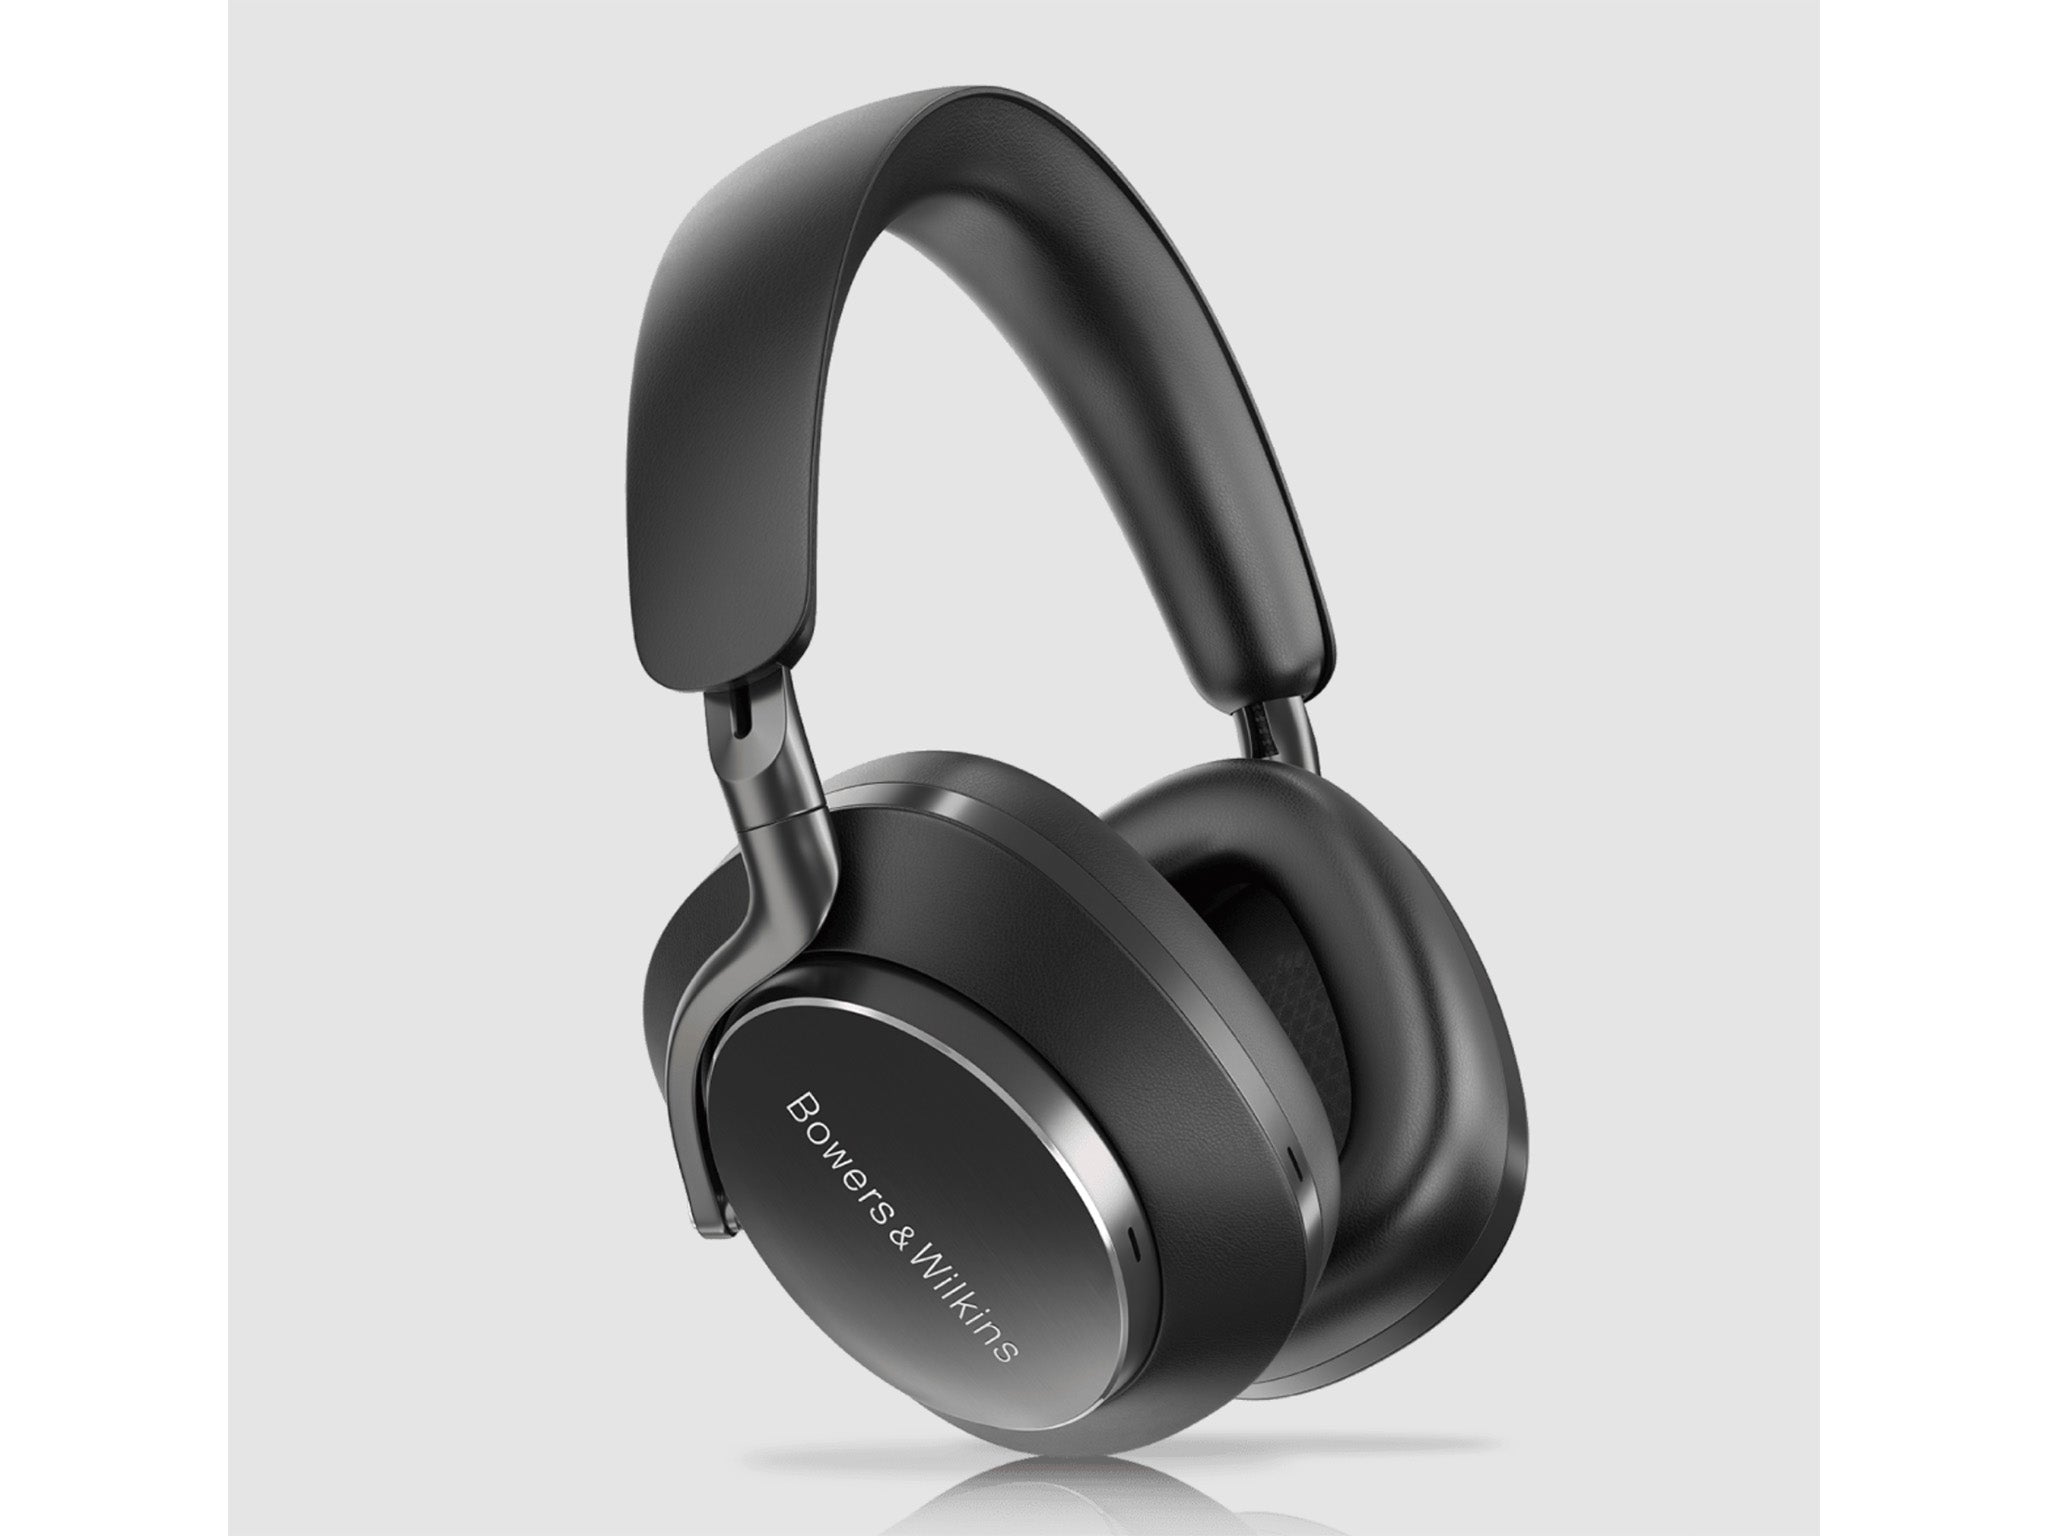 Bowers and Wilkins PX8 noise cancelling headphones